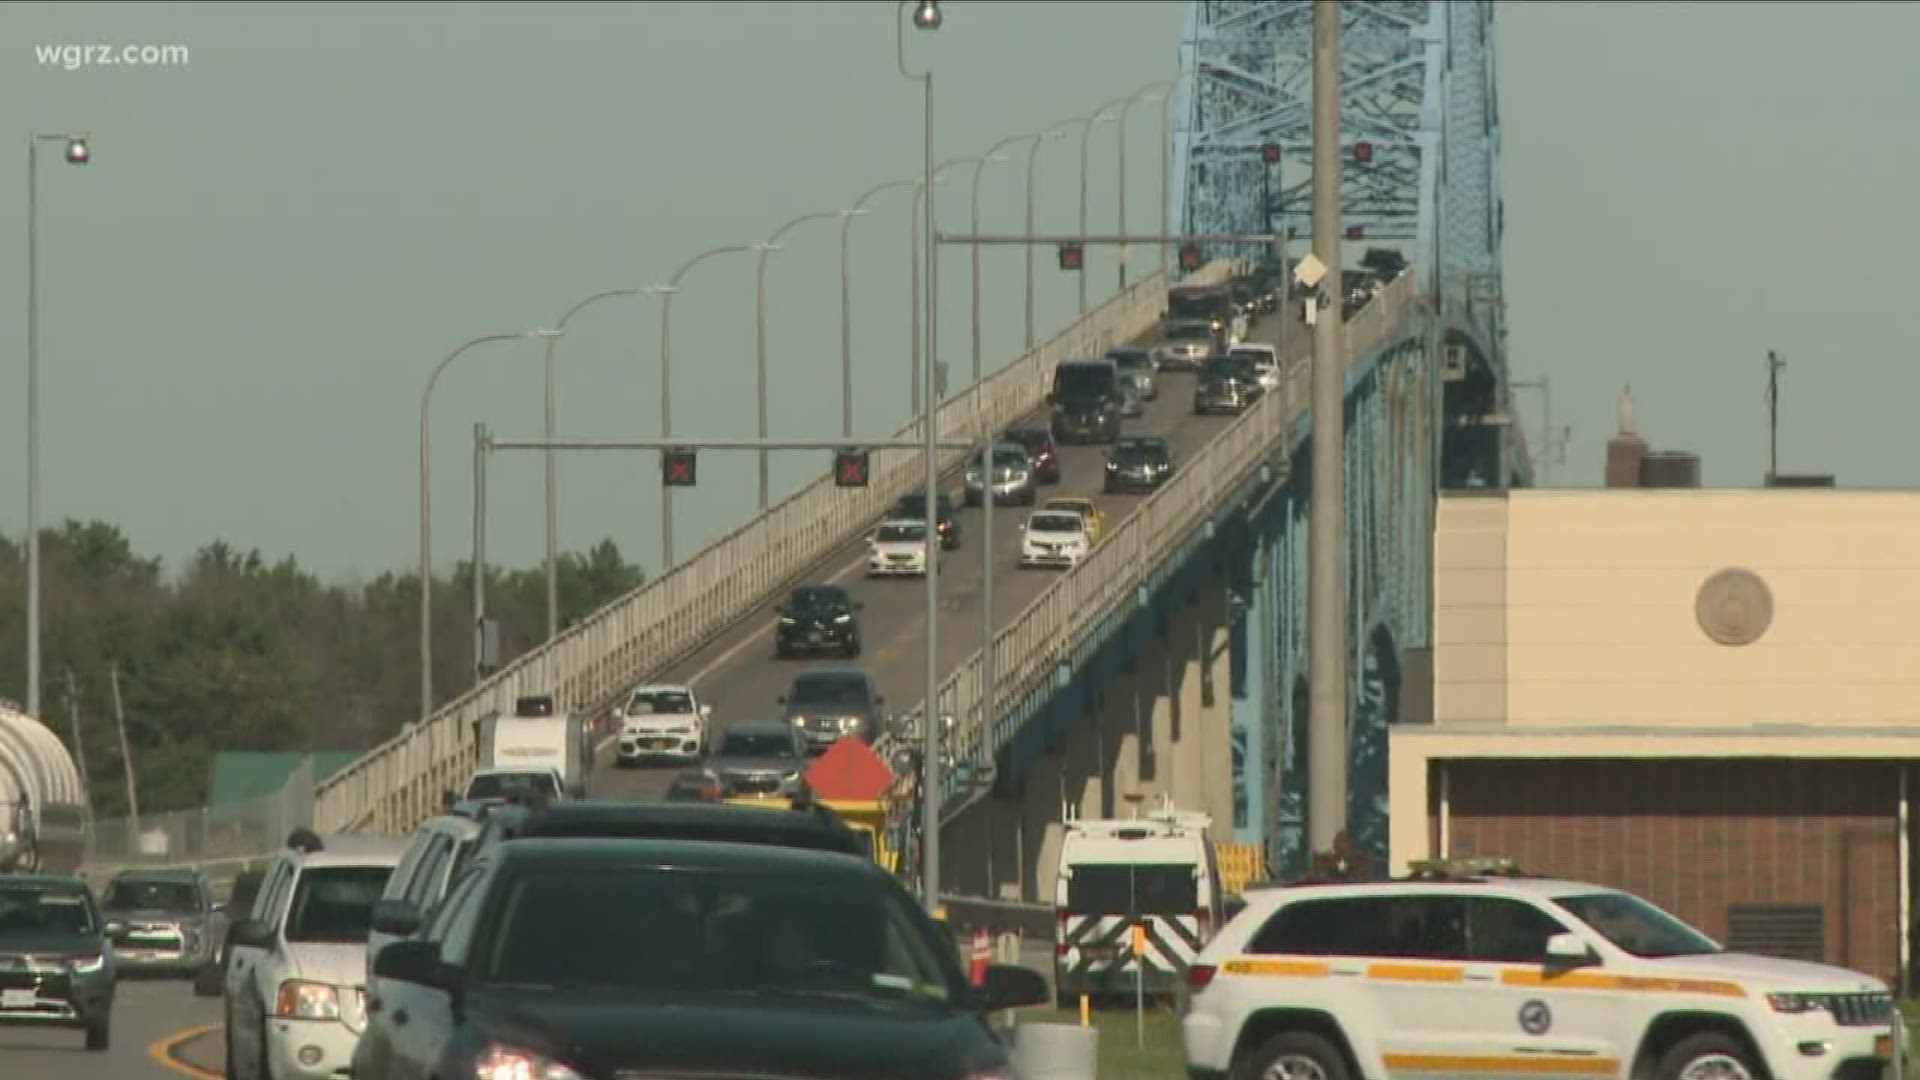 The Grand Island bridge is back open tonight.
In fact, it opened back up hours earlier than expected this morning.